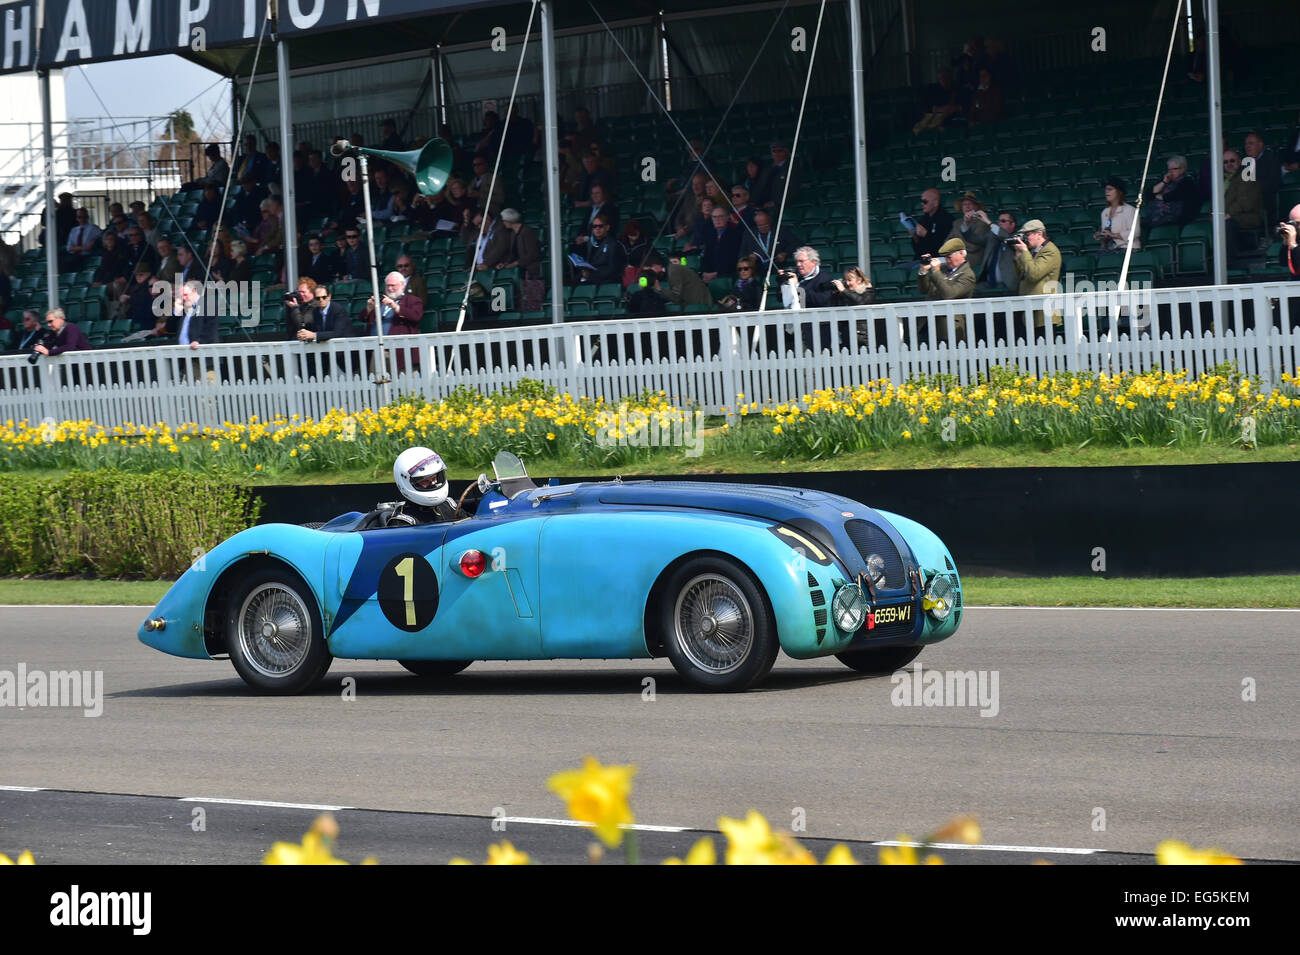 Stephen Gentry, Bugatti 57G, tank, Grover-Williams Trophy, 72nd members Meeting, Goodwood, GRRC, historic racing. Stock Photo